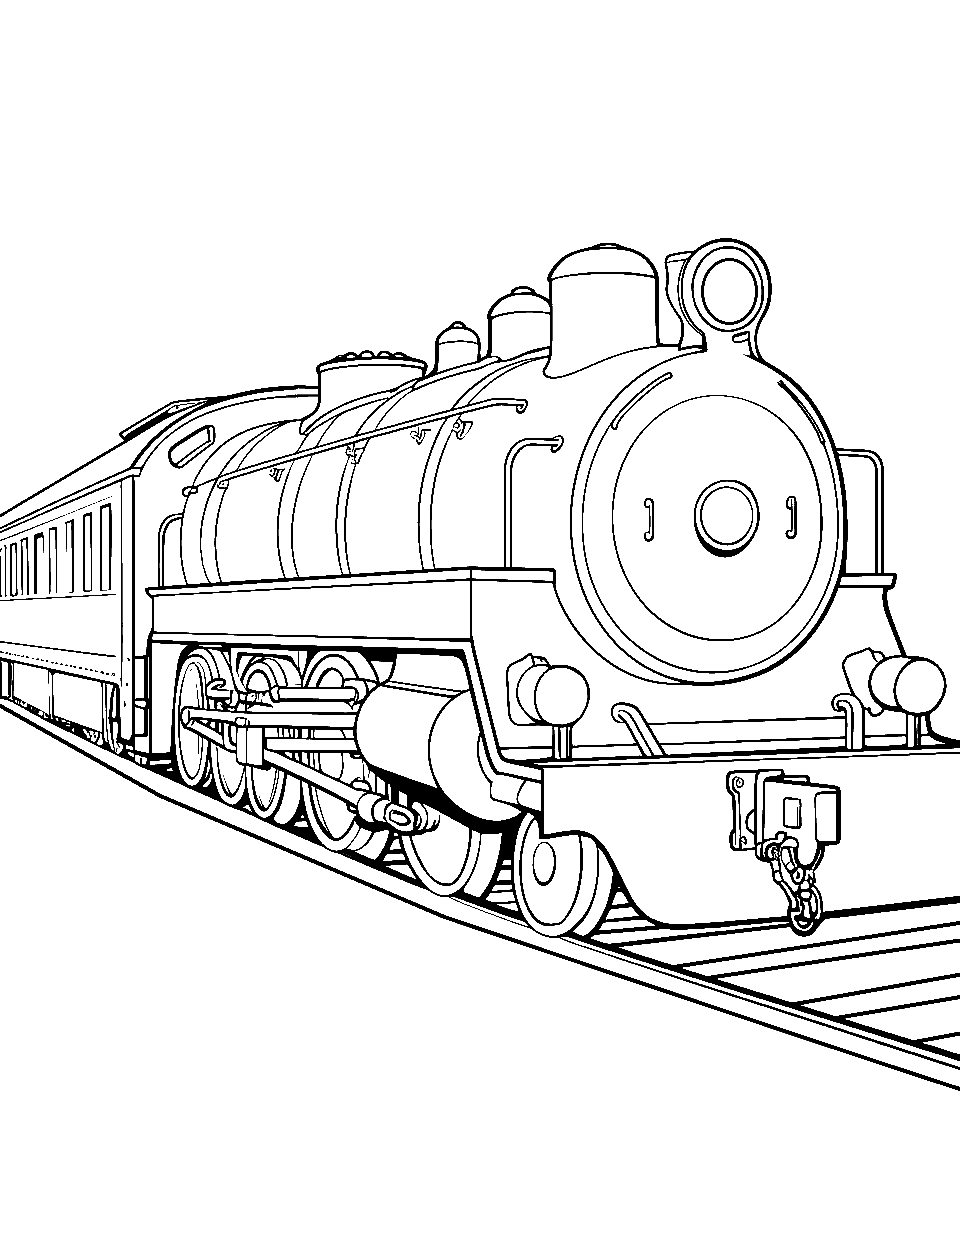 Train on the Tracks Coloring Page - A heavy-duty train rolling along the railway.